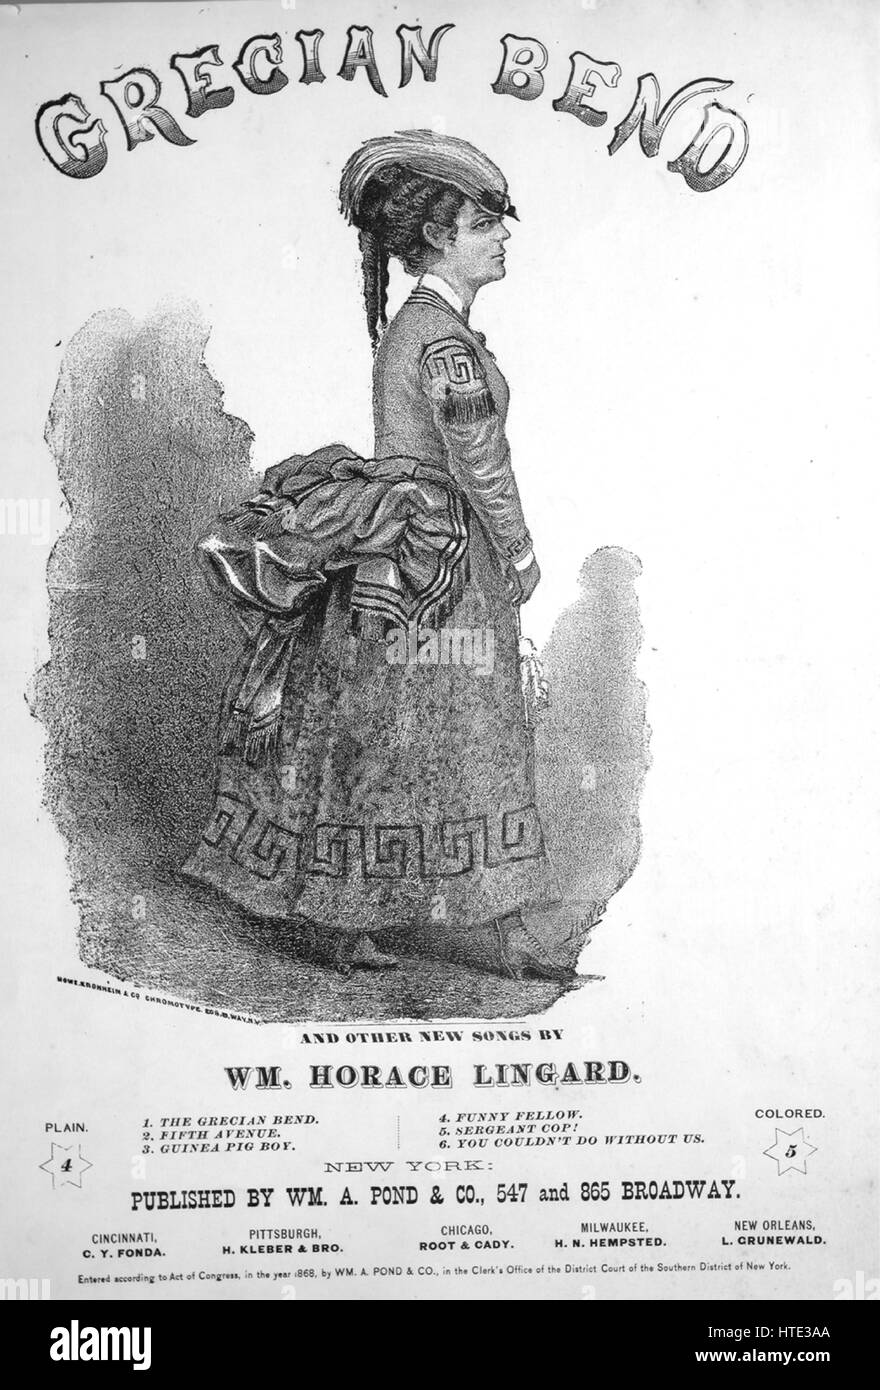 Sheet music cover image of the song 'Grecian Bend, And Other New Songs By Wm Horace Lingard No 2 Fifth Avenue', with original authorship notes reading 'Written and Composed by Wm H Lingard Arranged by Chas E Pratt', United States, 1868. The publisher is listed as 'Wm. A. Pond and Co., 547 and 865 Broadway', the form of composition is 'strophic with chorus', the instrumentation is 'piano and voice', the first line reads 'Before you stands Frank Rifle, An Ensign in our corps', and the illustration artist is listed as 'Rowe, Kronheim and Co. Chromotype, 208 B'way N.Y.'. Stock Photo